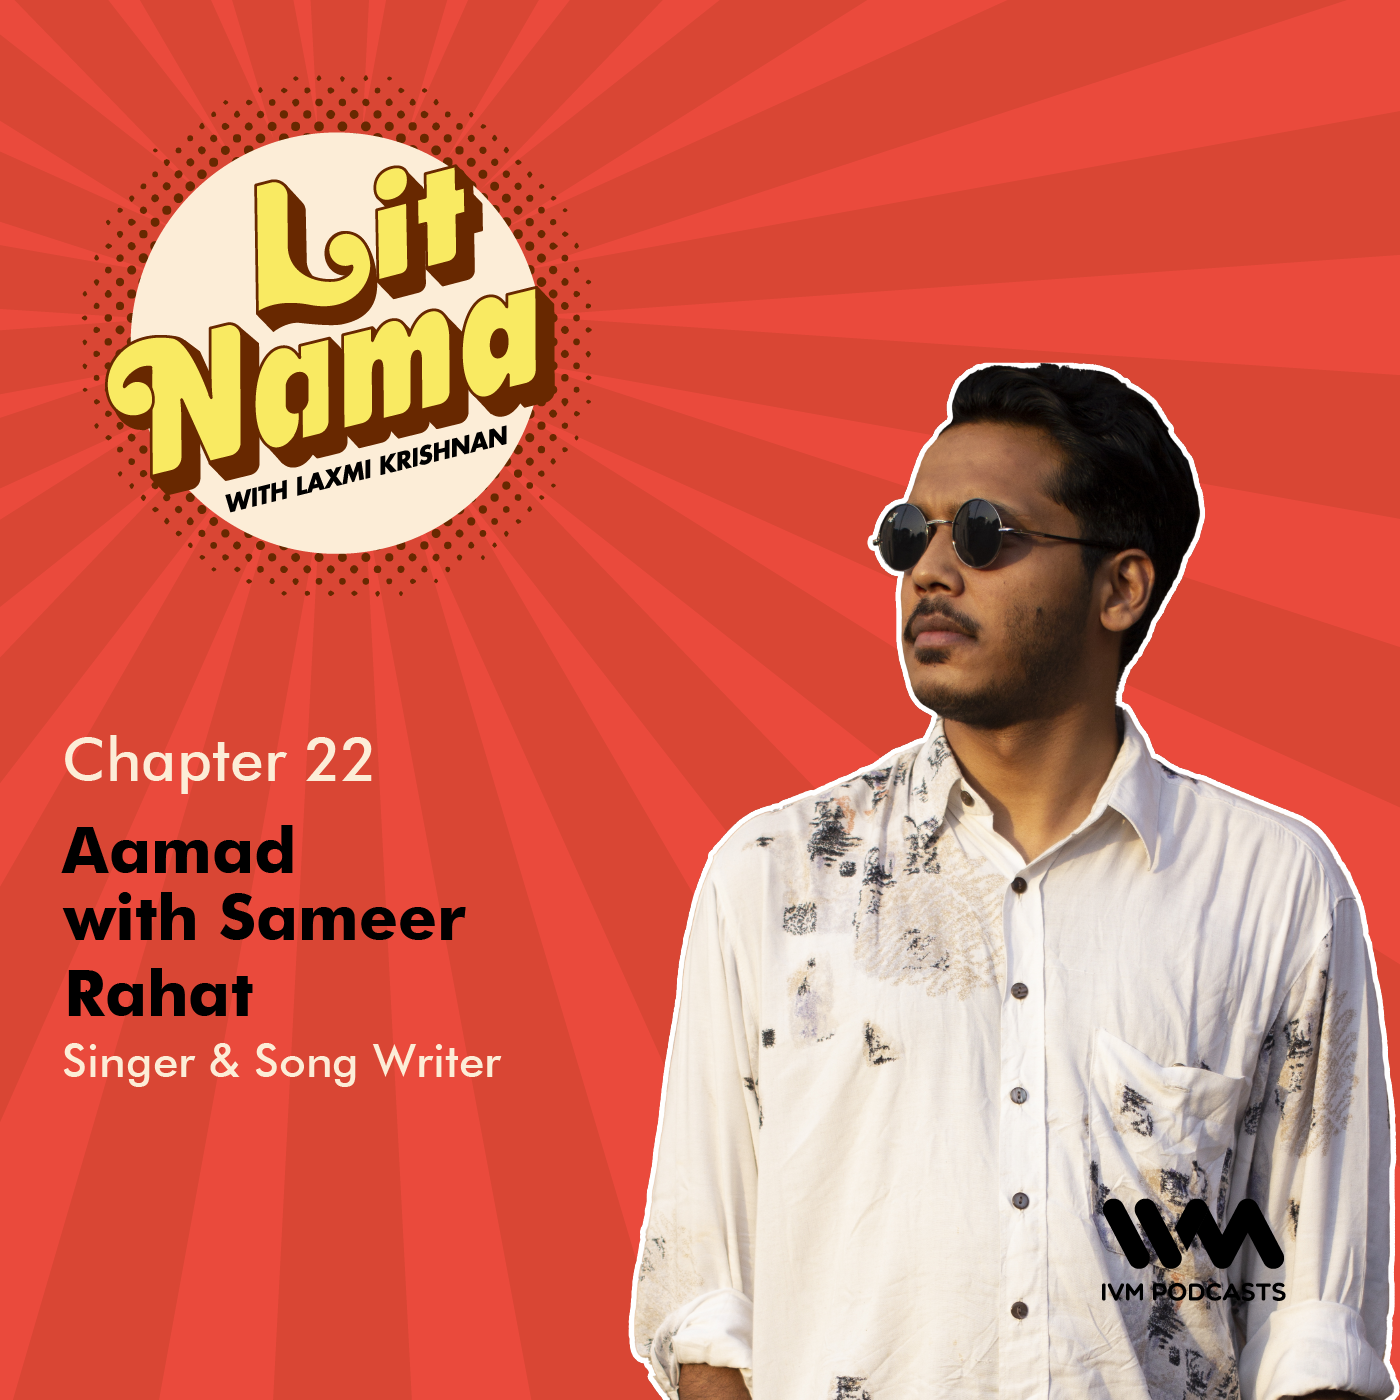 Chapter. 22: Aamad with Sameer Rahat